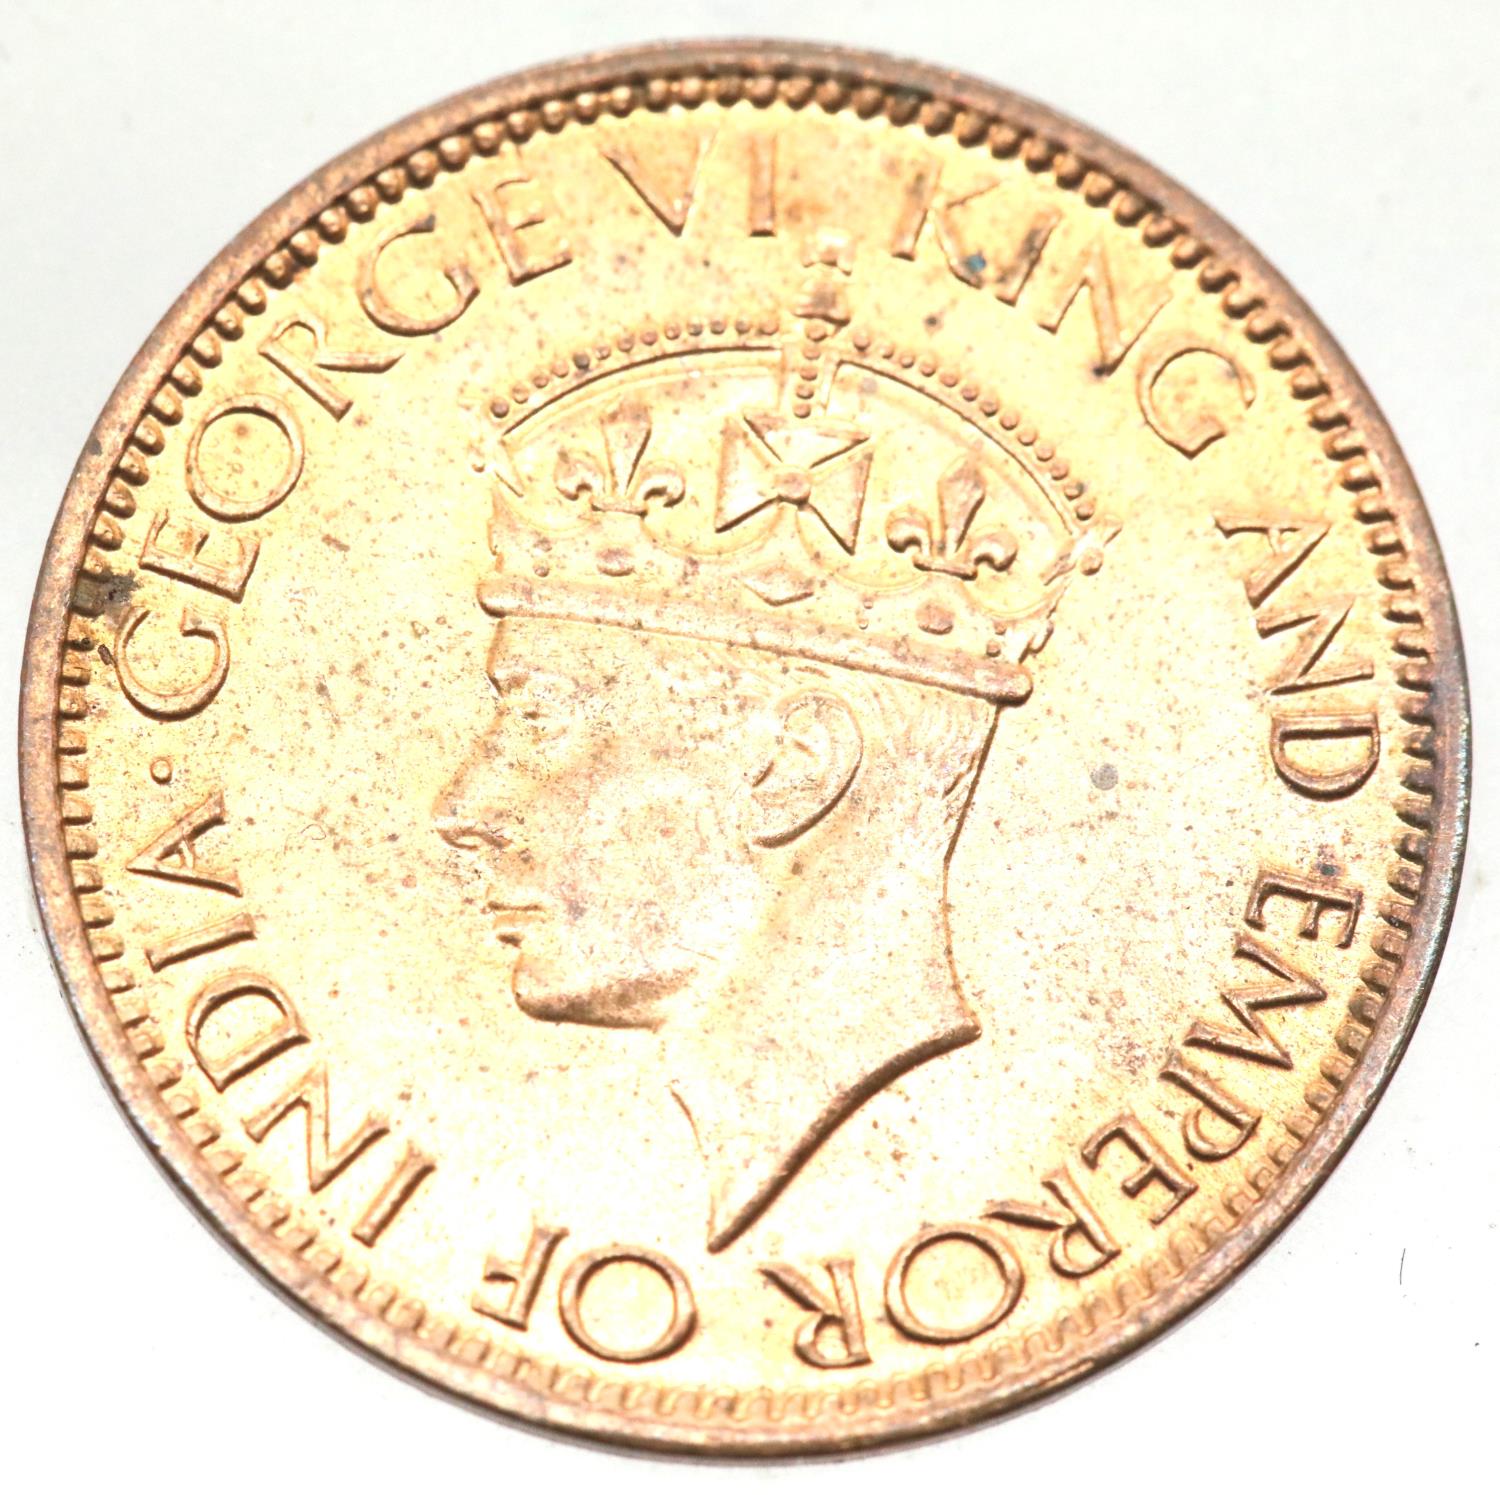 1945 - Ceylon - Uncirculated one Cent piece. P&P Group 1 (£14+VAT for the first lot and £1+VAT for